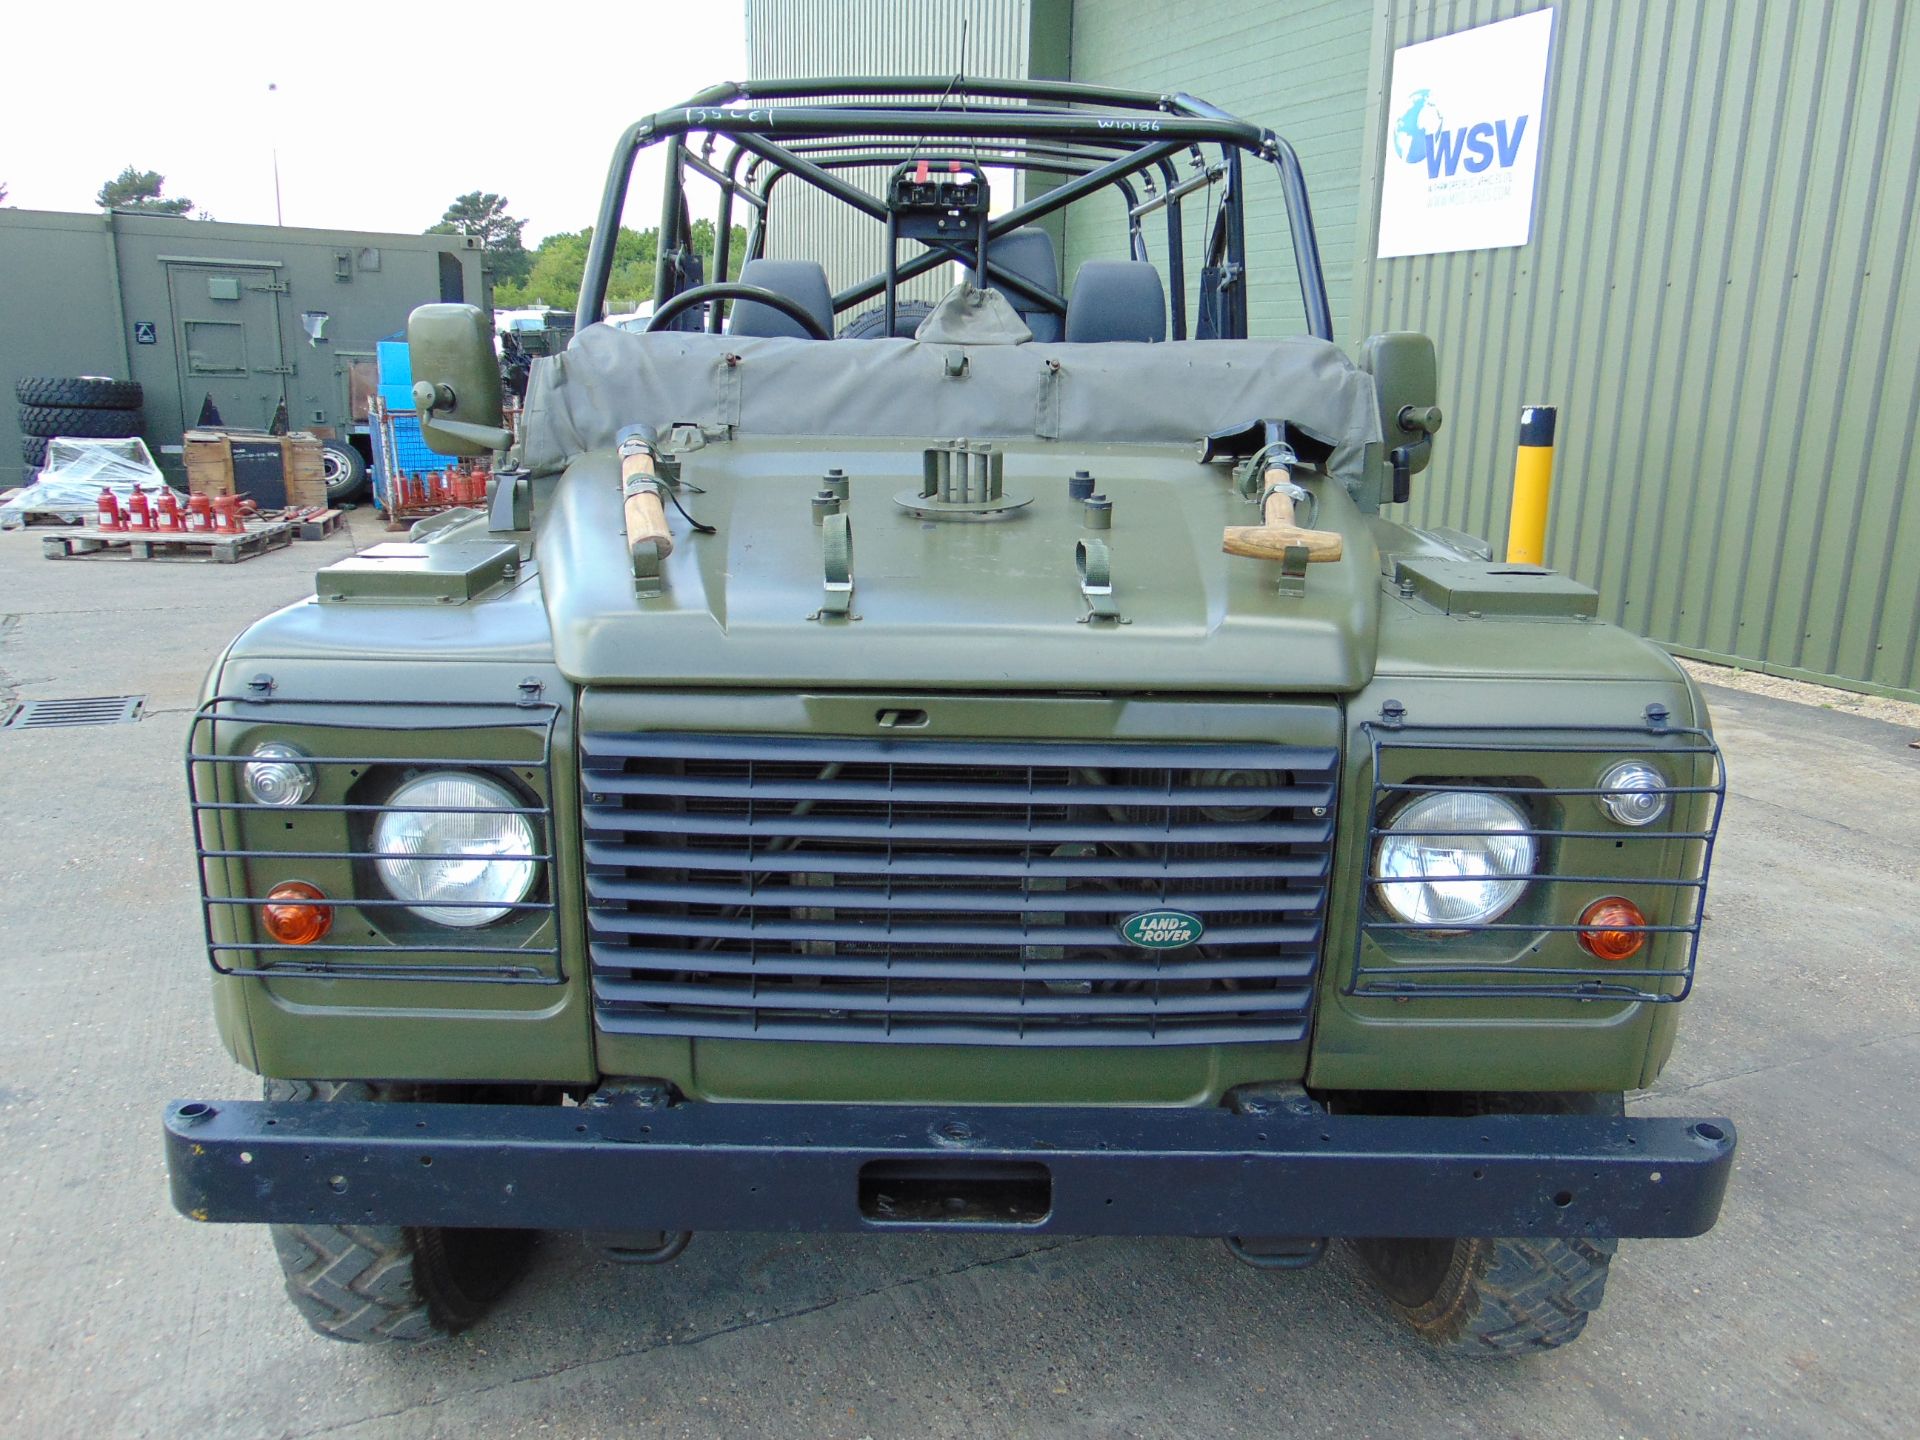 Land Rover Defender Wolf 110 Scout vehicle 300 Tdi - Image 4 of 37